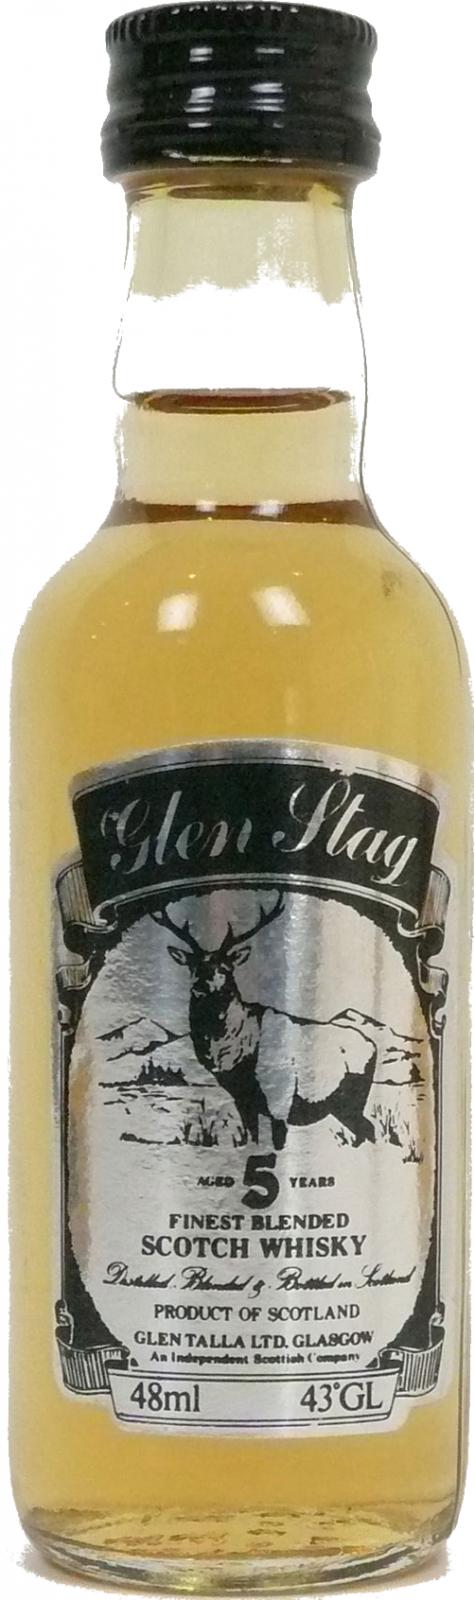 Glen Stag 05-year-old